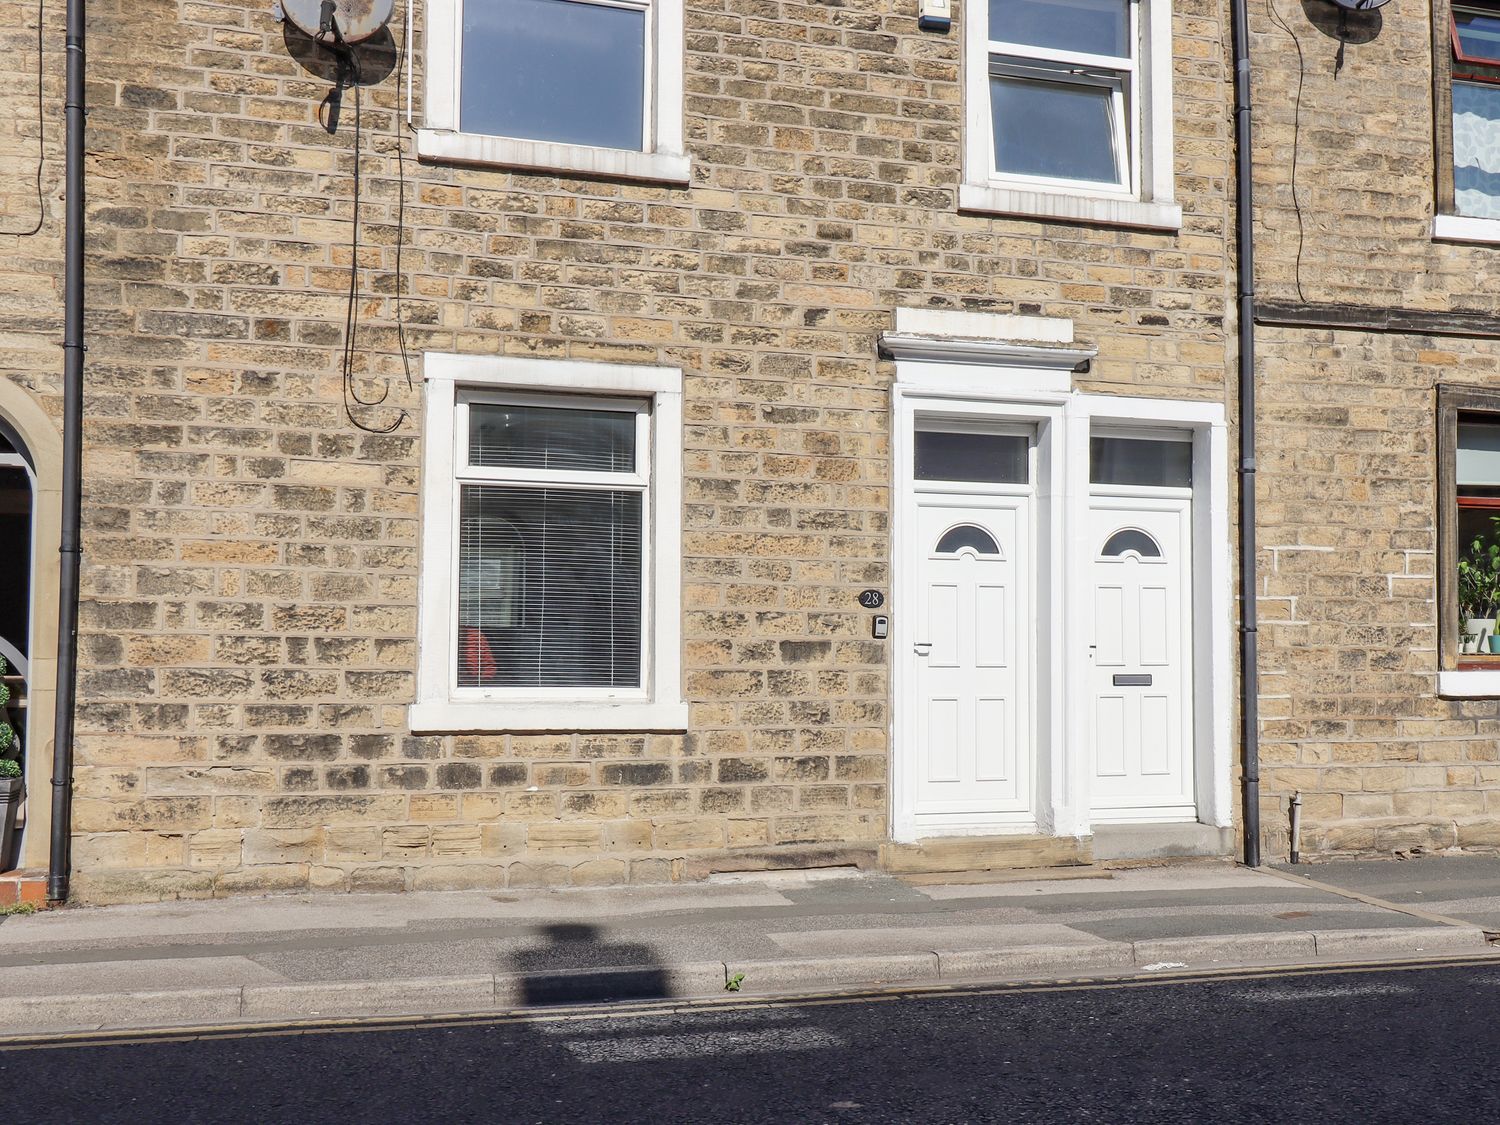 28 Water Street - Yorkshire Dales - 1137898 - photo 1